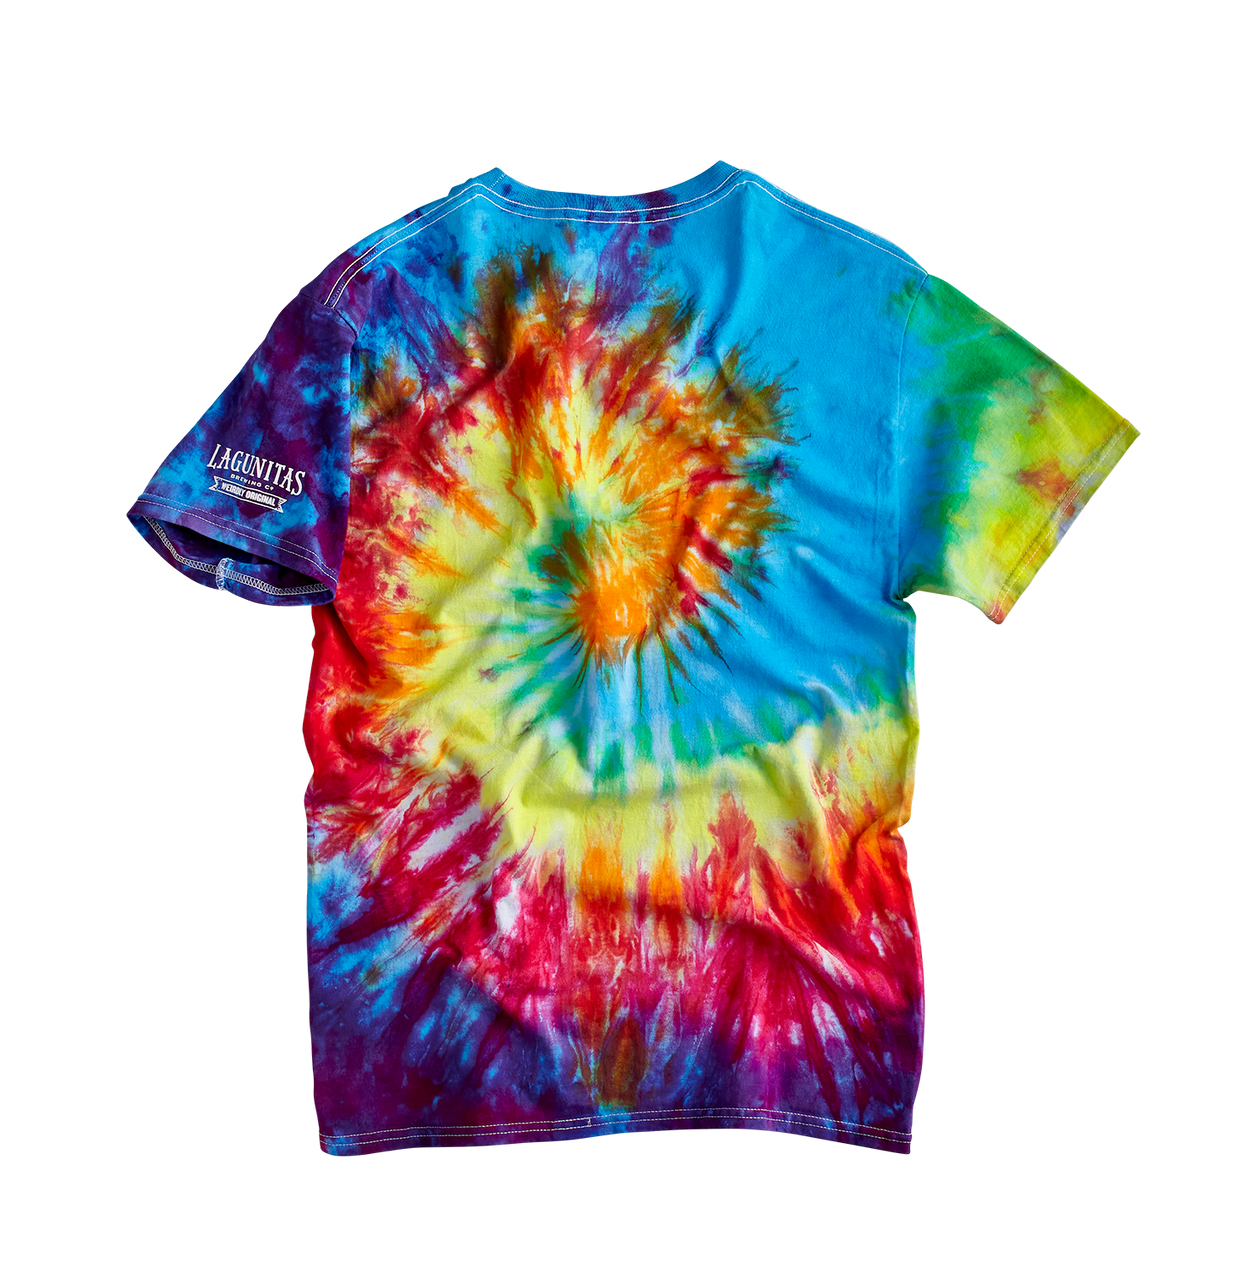 “A stylish and vibrant tie-dye t-shirt for dog lovers. Features a unique design with an eye-catching dog graphic. Unisex adult tee made from comfortable and soft fabric, perfect for fashion-forward individuals”